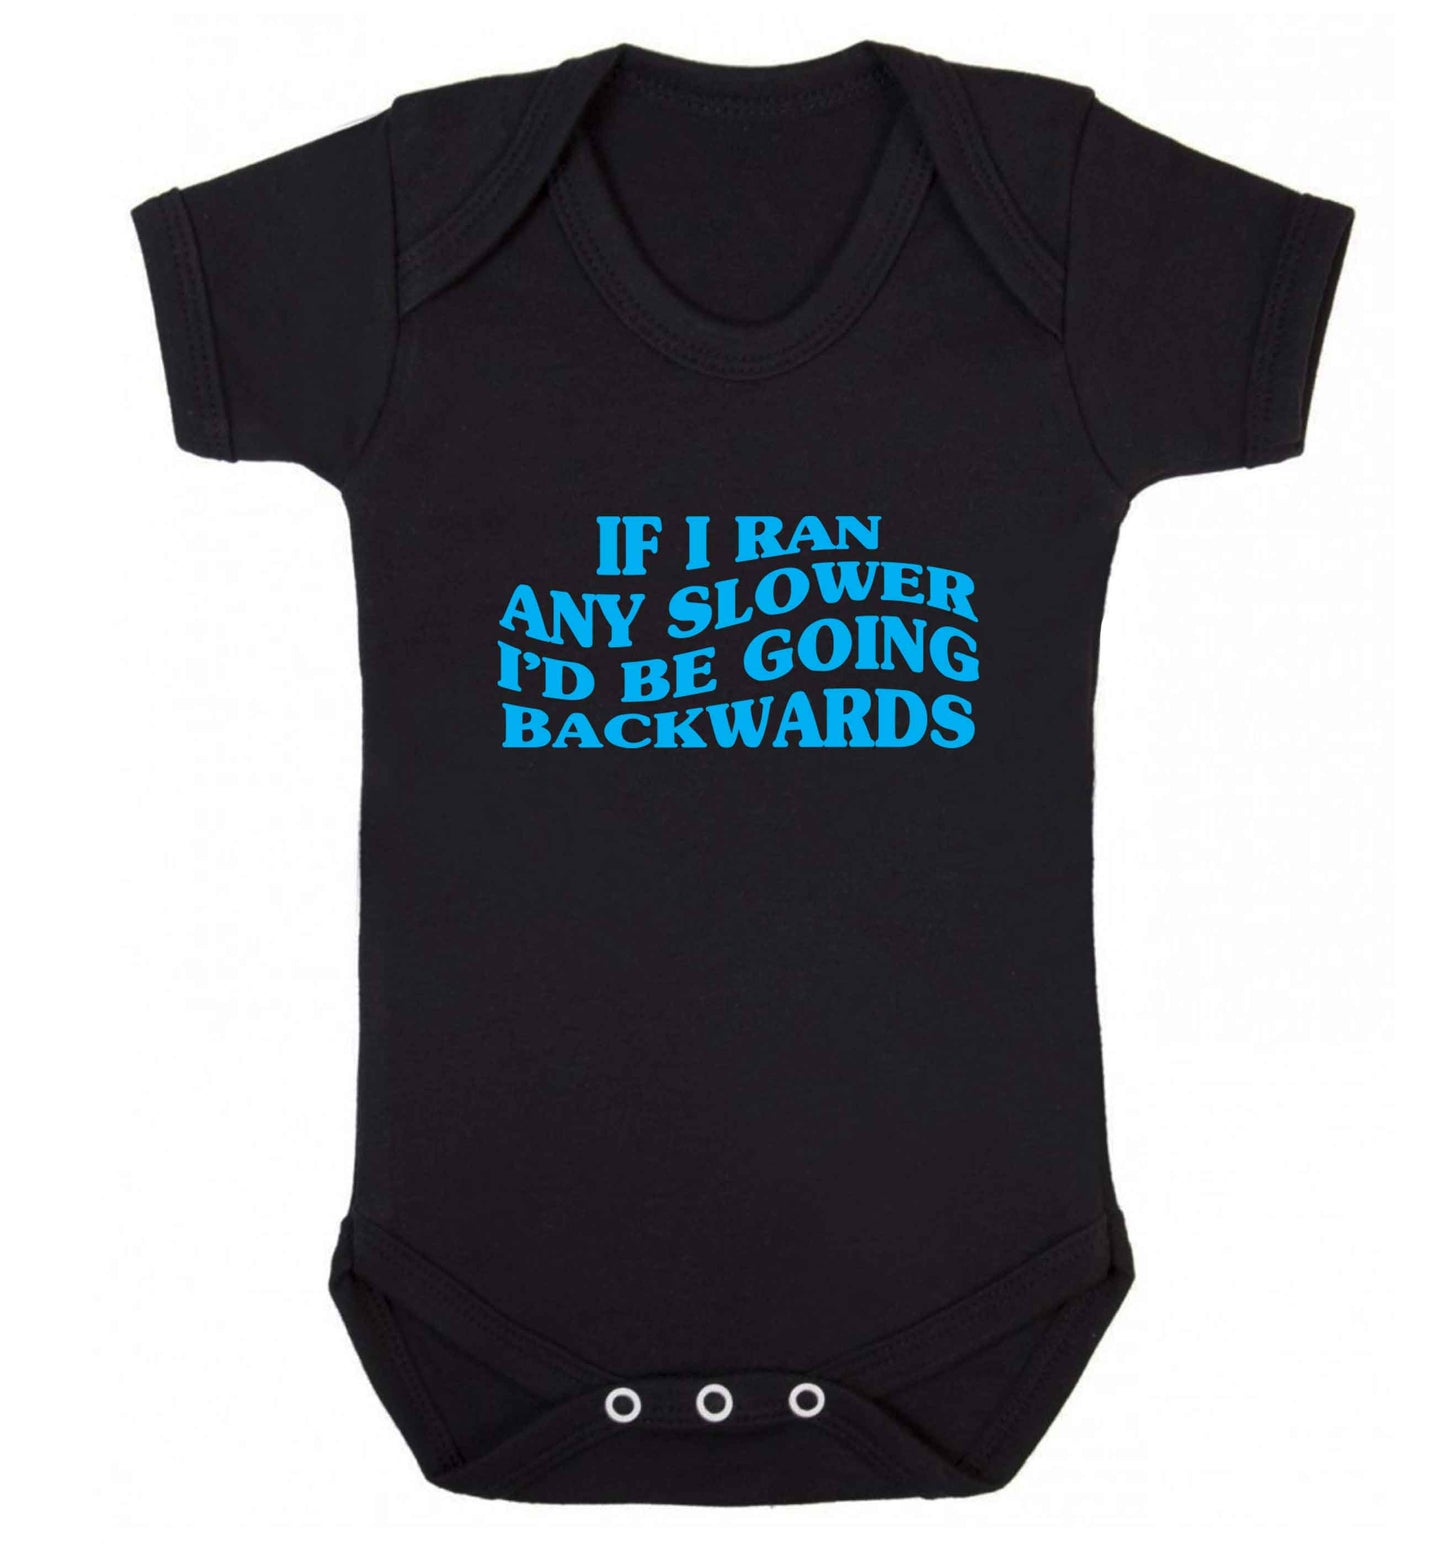 If I ran any slower I'd be going backwards baby vest black 18-24 months